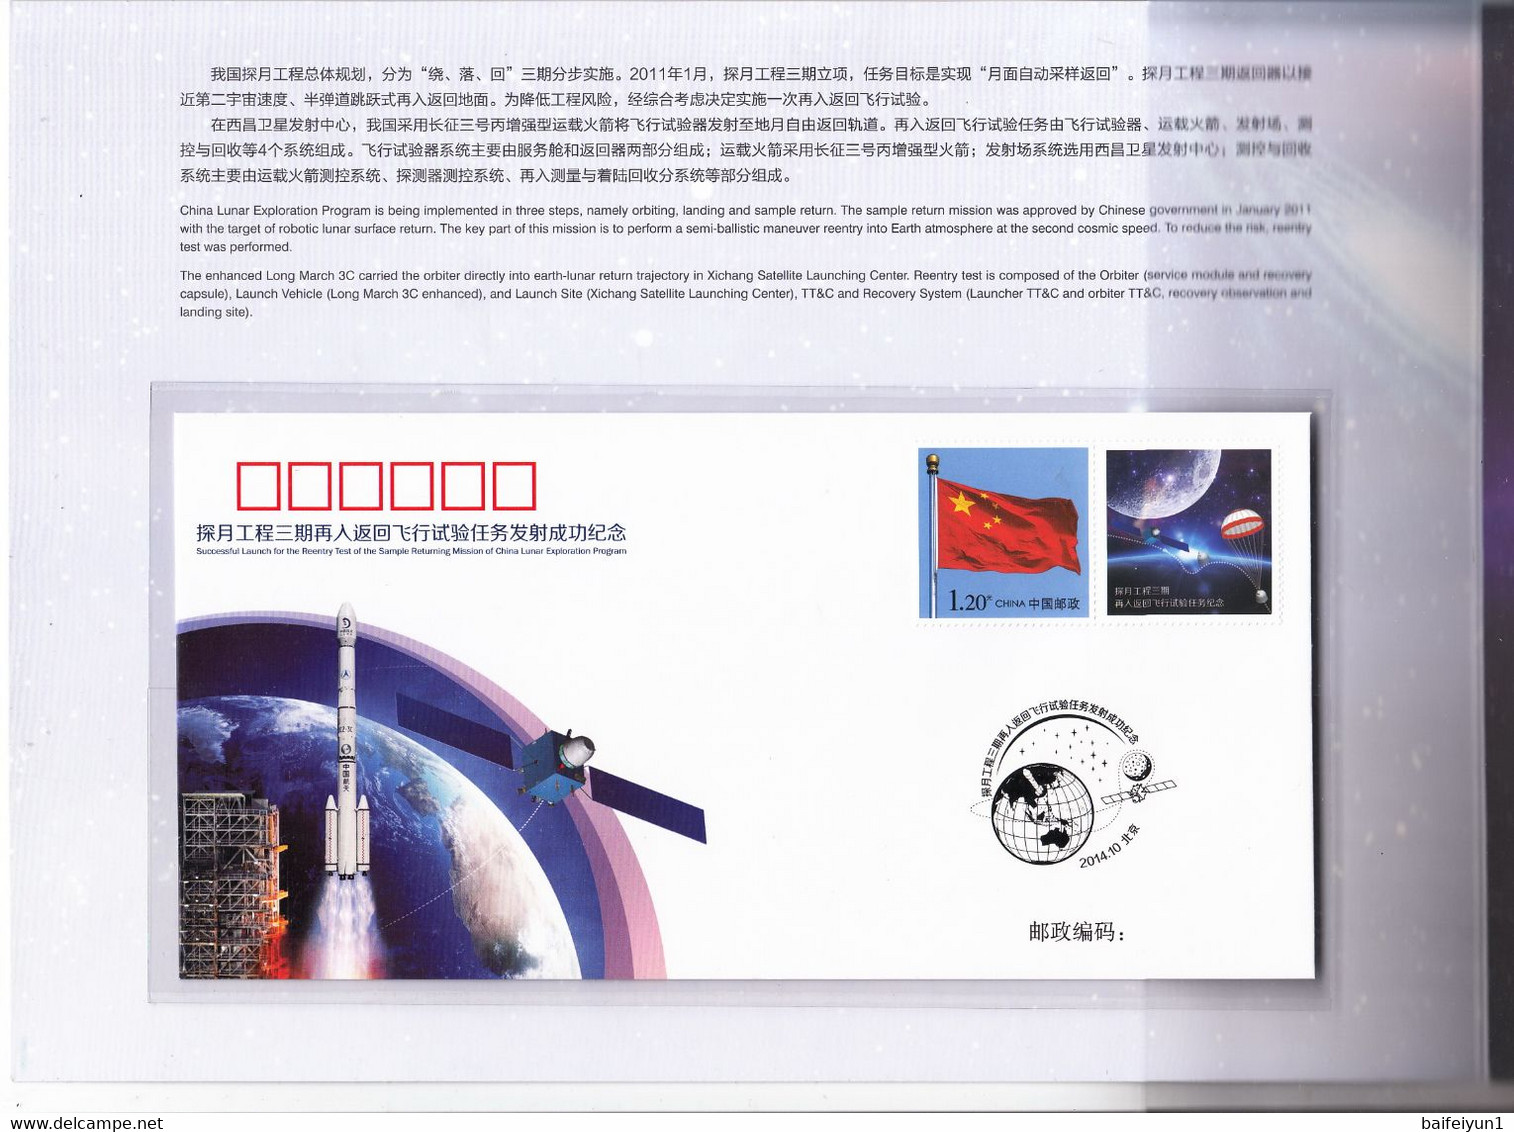 China 2014 In commemoration of Success of Reentry Test of the Sample Returning Mission of China Lunar Exploration Folder